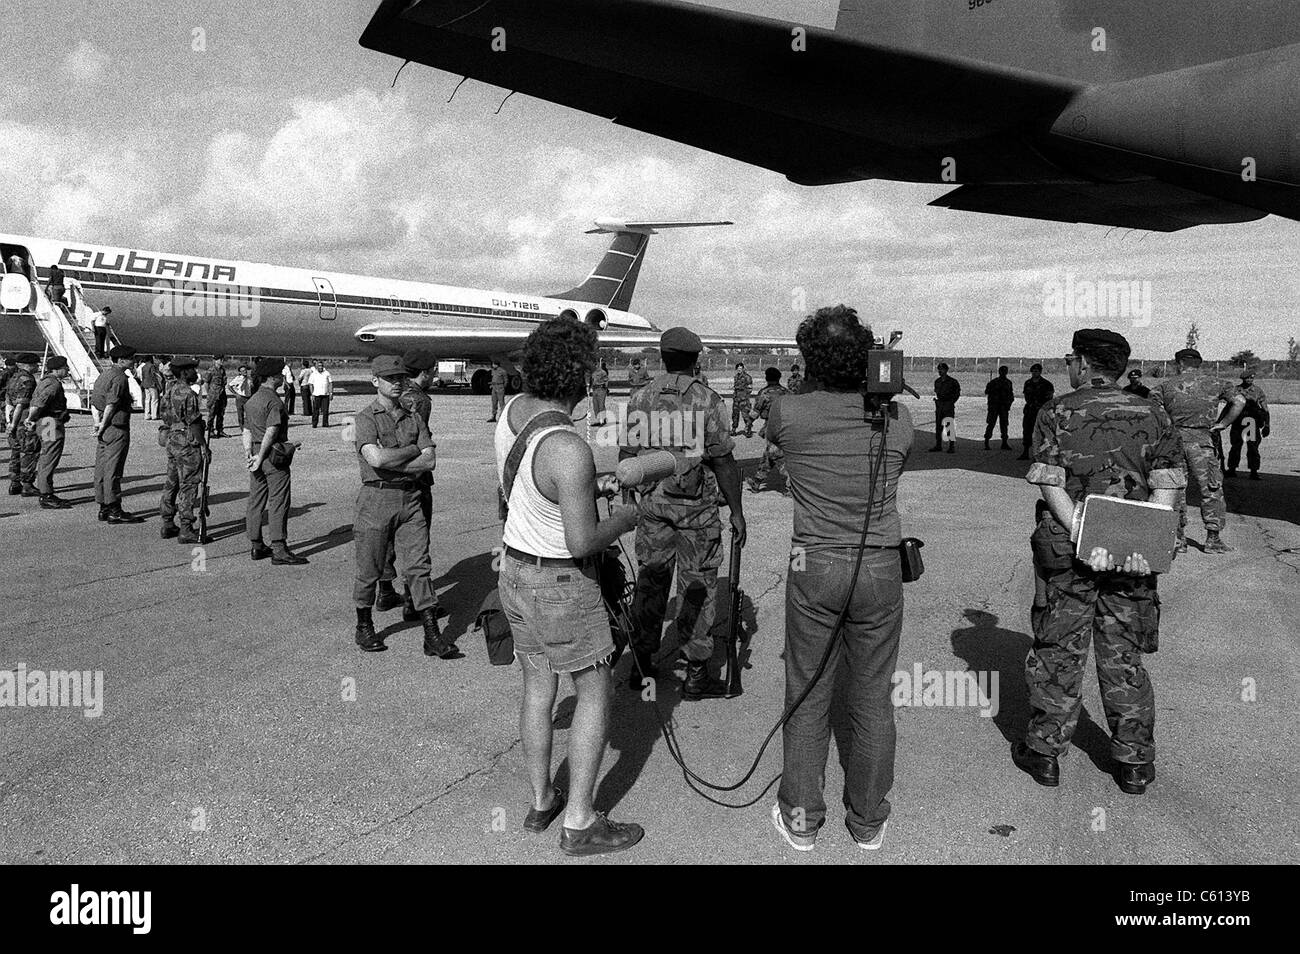 U.S. Air Force security police guard Cuban nationals as they board the airliner returning them to Cuba. The Cuban presence influenced to U.S. invasion of Grenada on Oct. 25 1983. (BSLOC 2011 3 33) Stock Photo